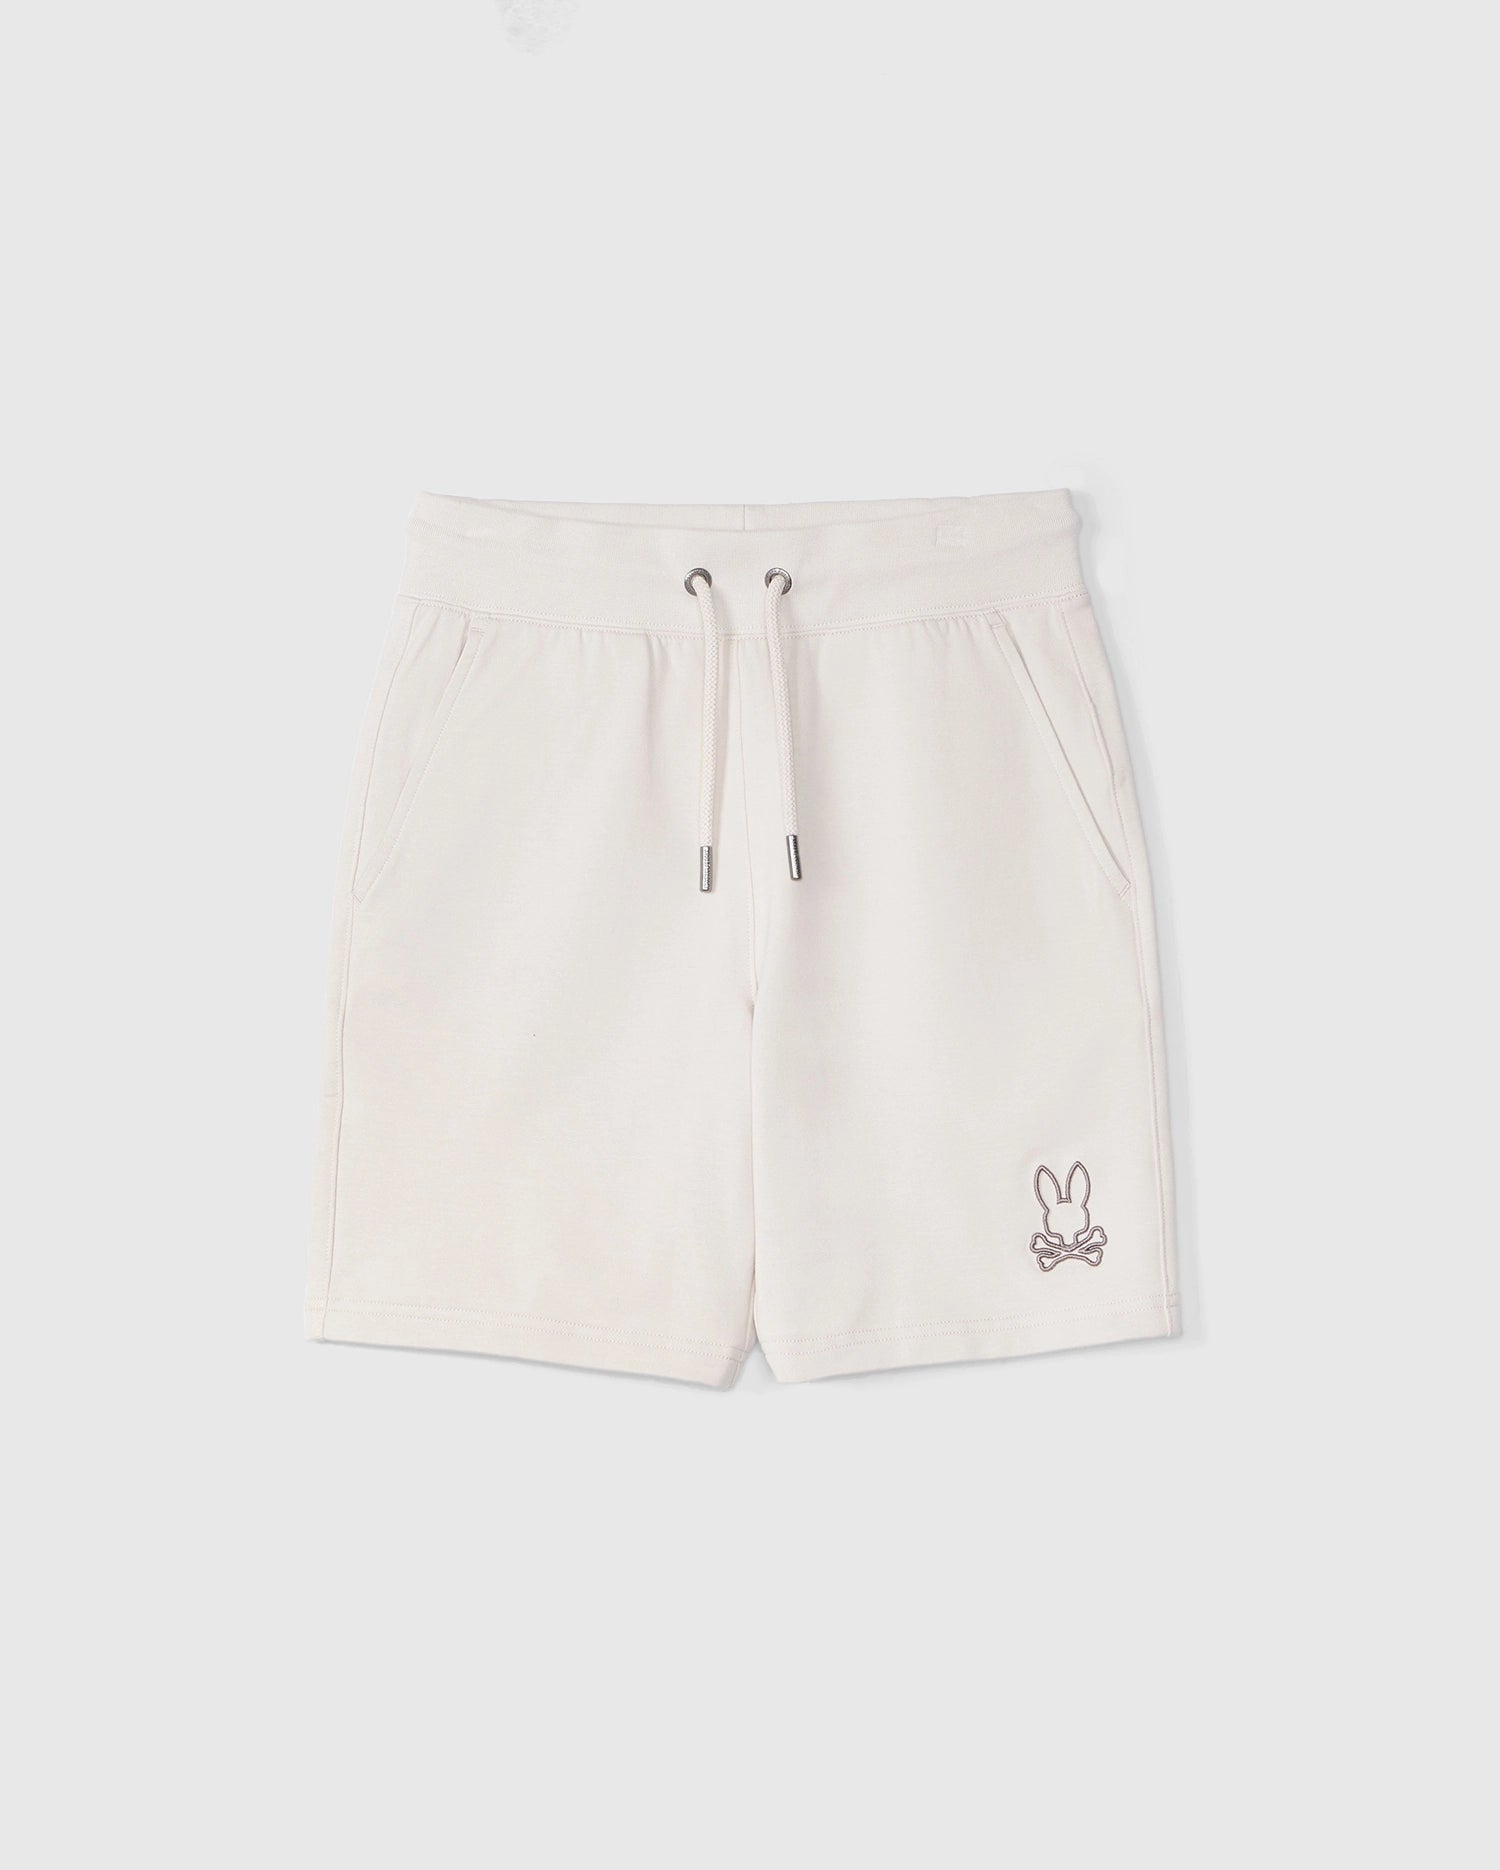 A pair of light beige KIDS LIVINGSTON TERRY SWEATSHORT shorts from Psycho Bunny with a drawstring waist and side pockets, featuring a small embroidered bunny logo on the bottom left leg, displayed on a plain white background.